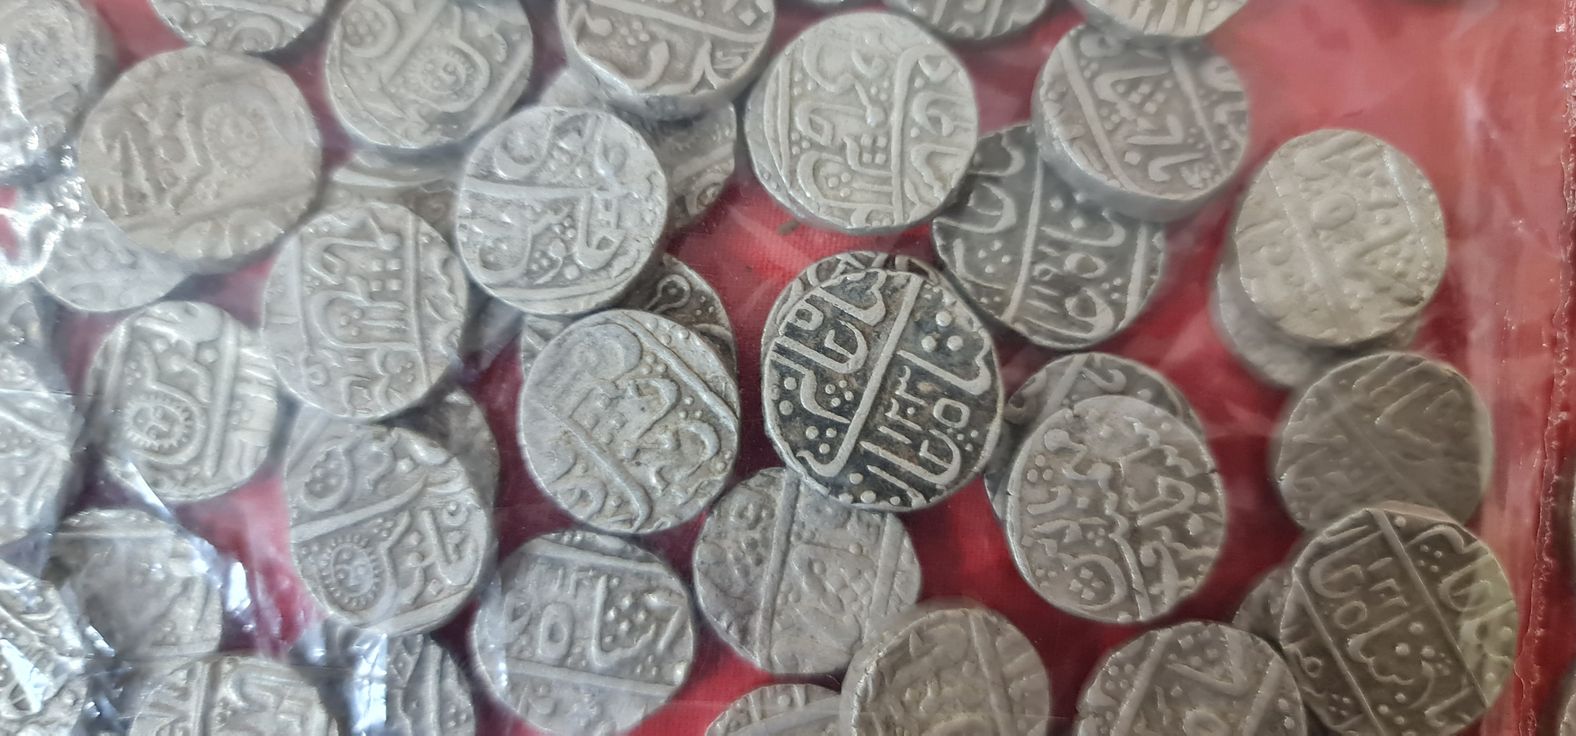 Princely coins of silver found in copper pot